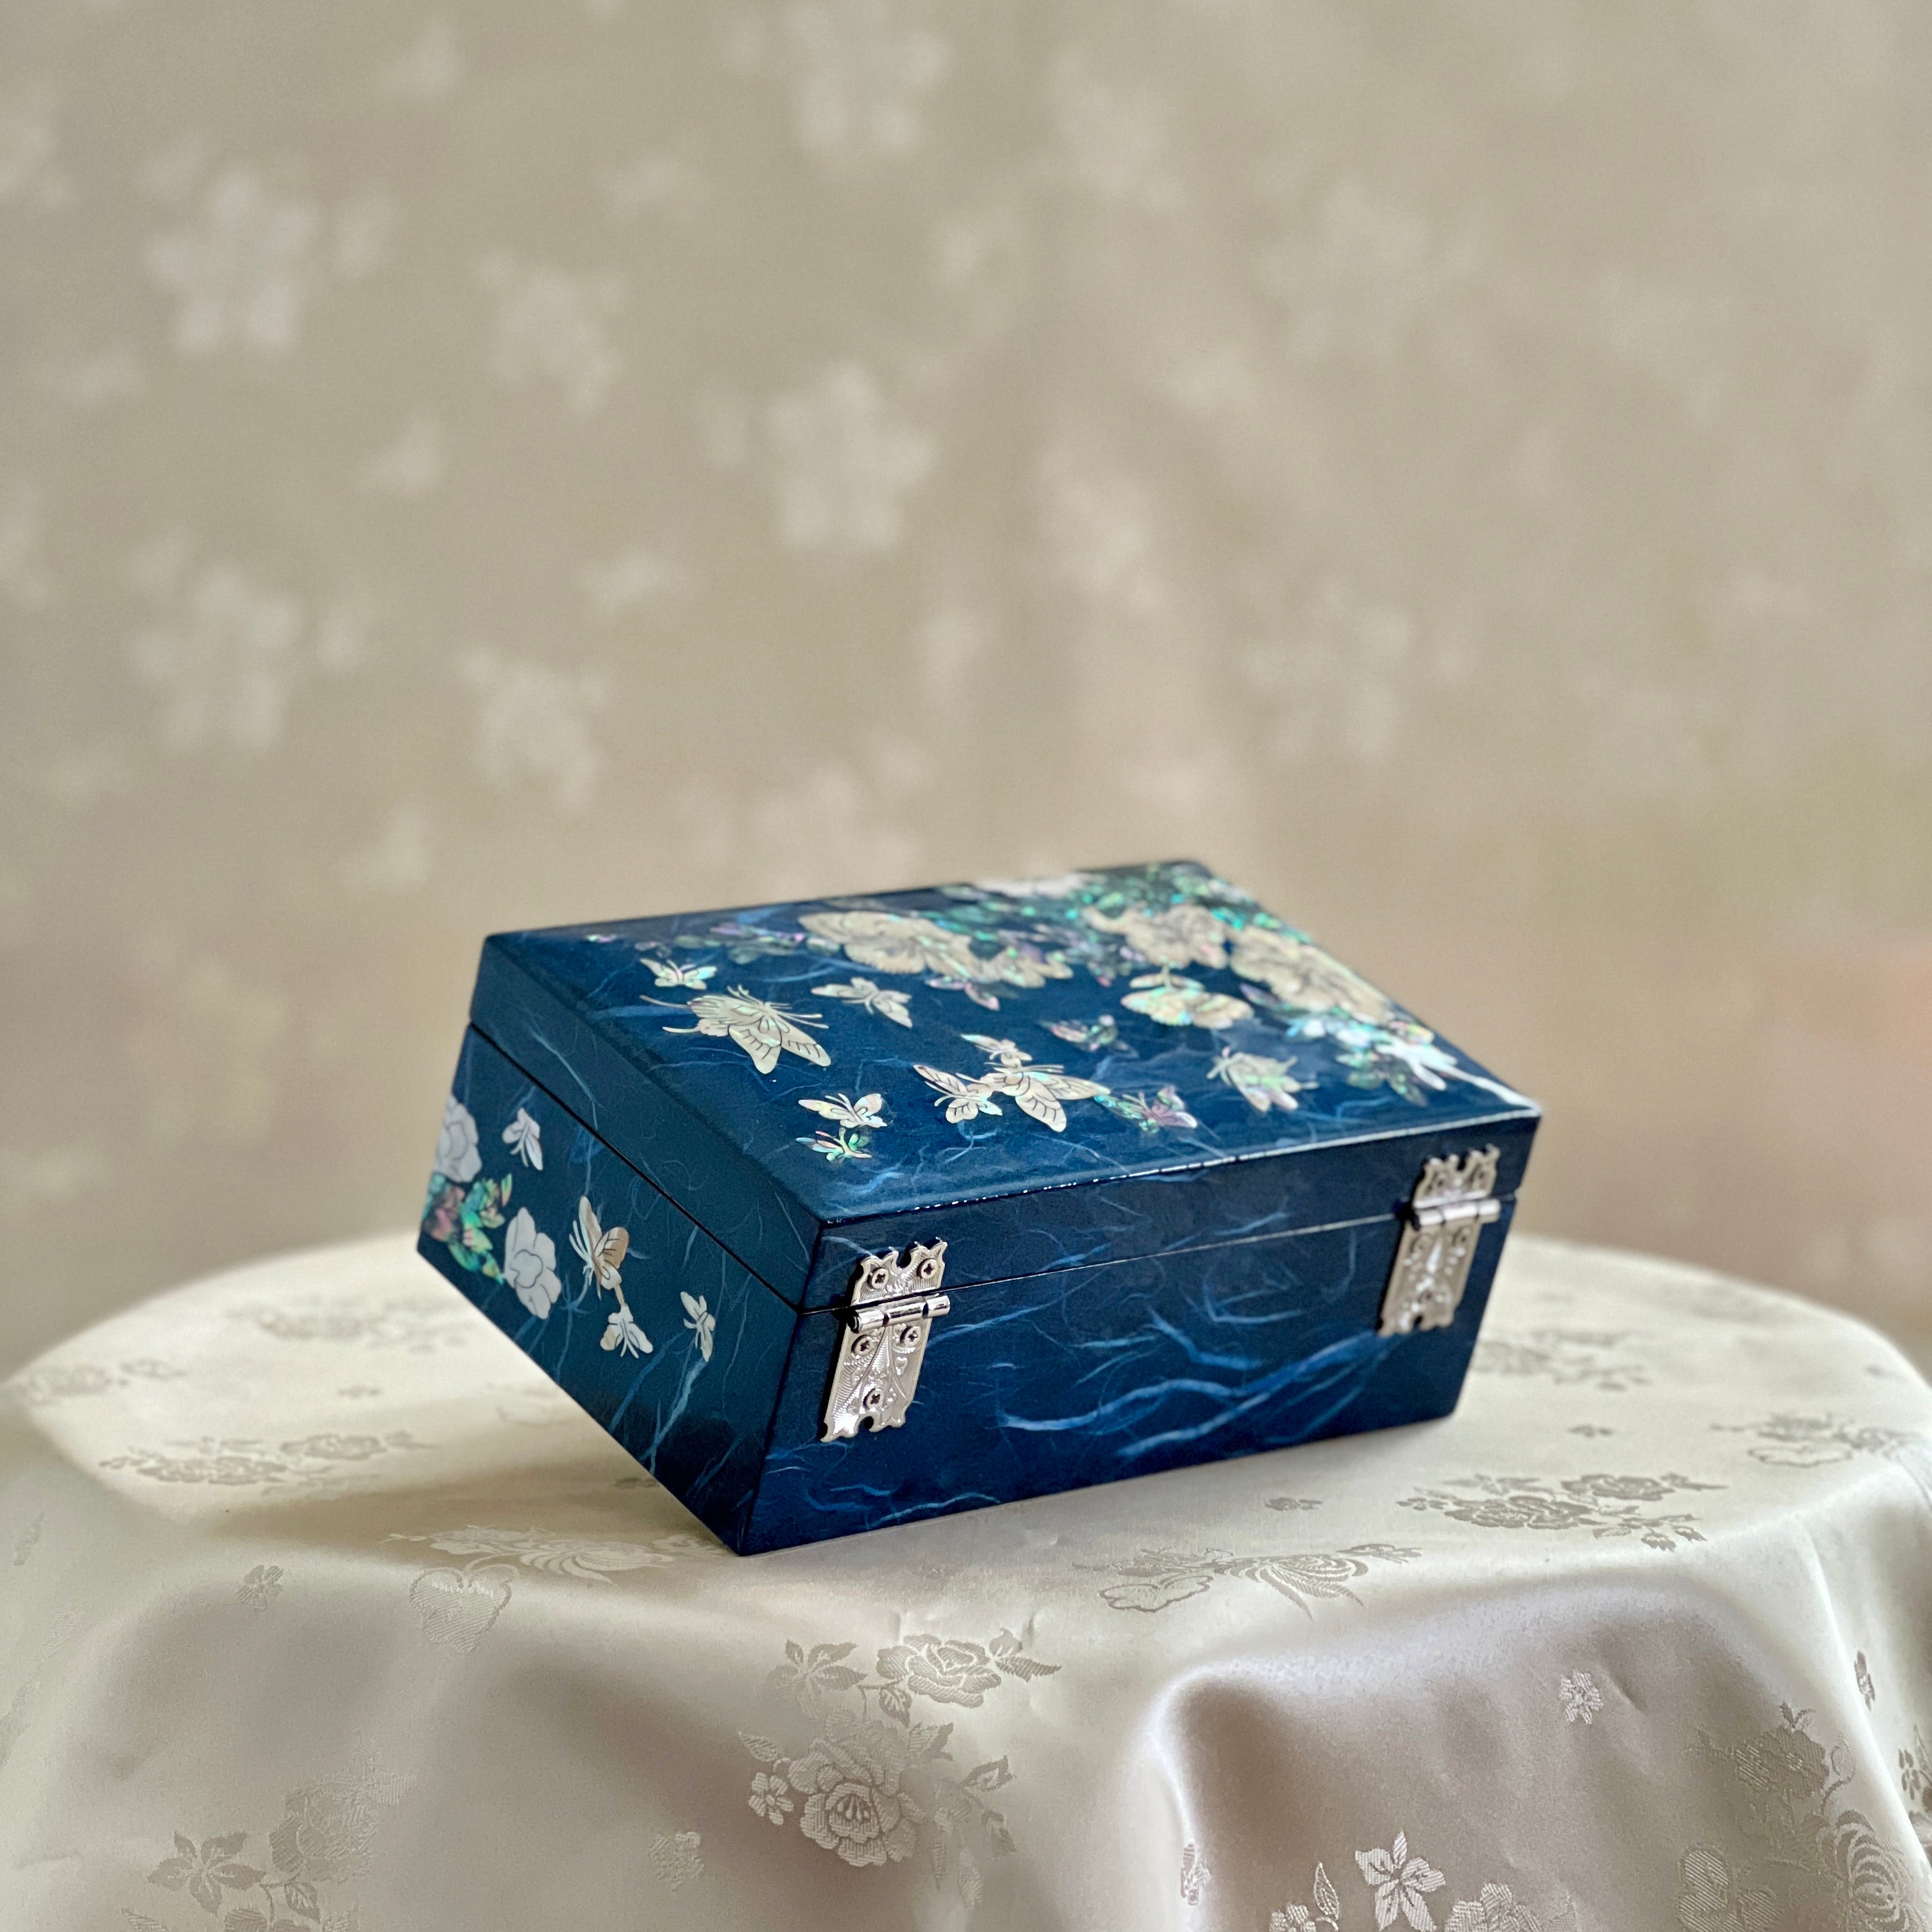 Side and Back view of Handmade Korean mother of pearl jewelry box with crane and pine pattern on navy paper-layered design, perfect for storing valuable jewelry.